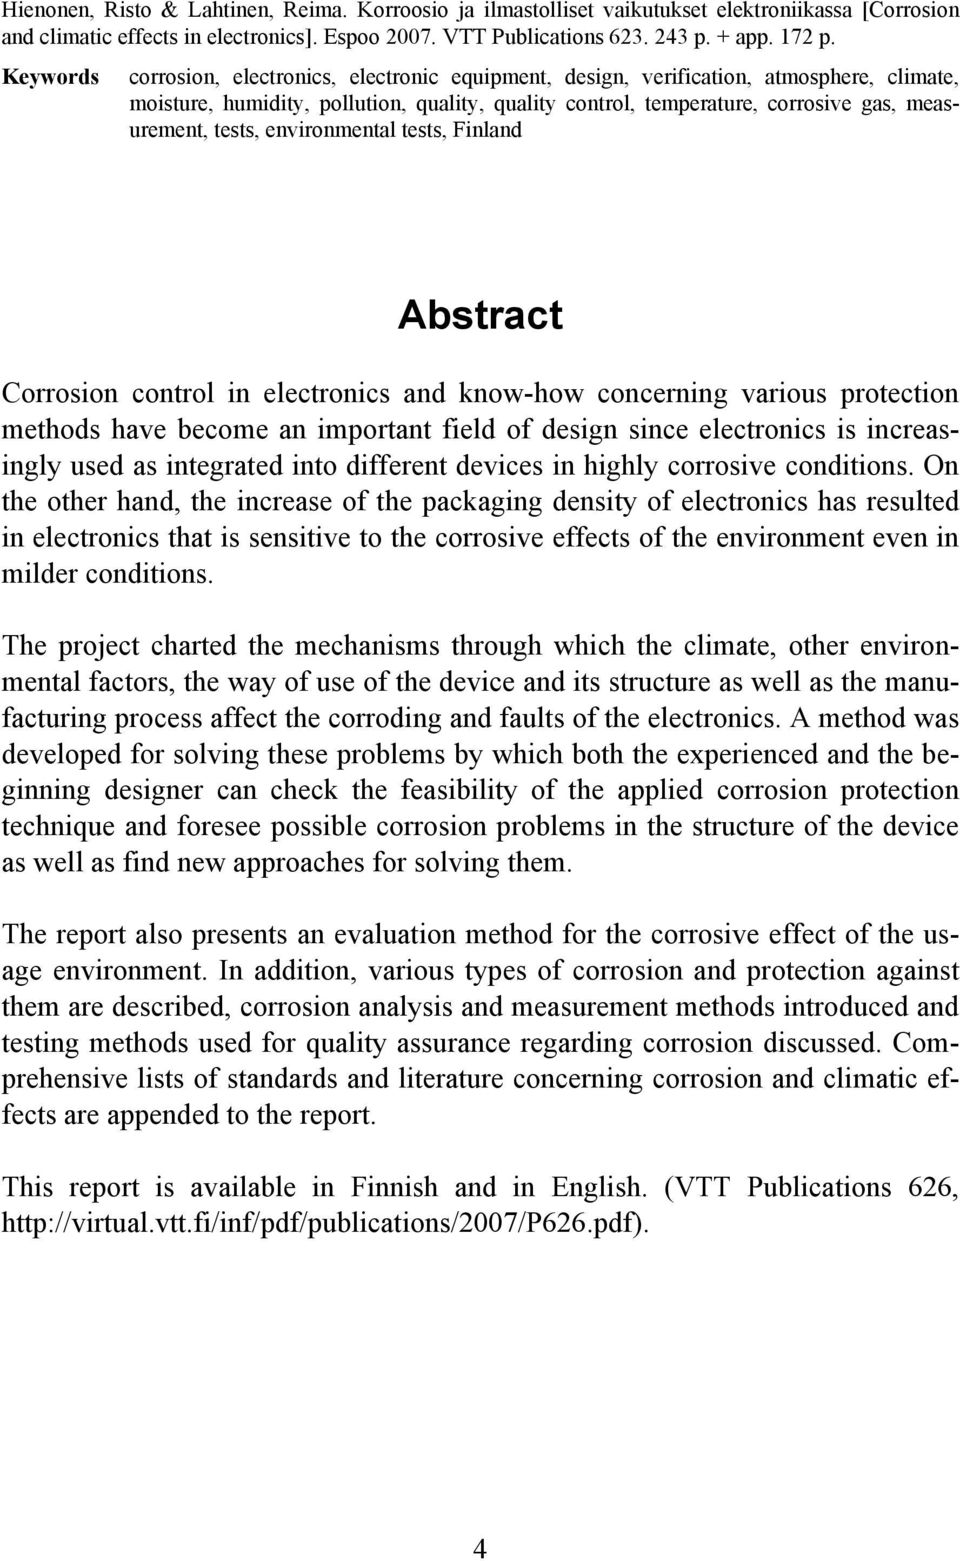 tests, environmental tests, Finland Abstract Corrosion control in electronics and know-how concerning various protection methods have become an important field of design since electronics is